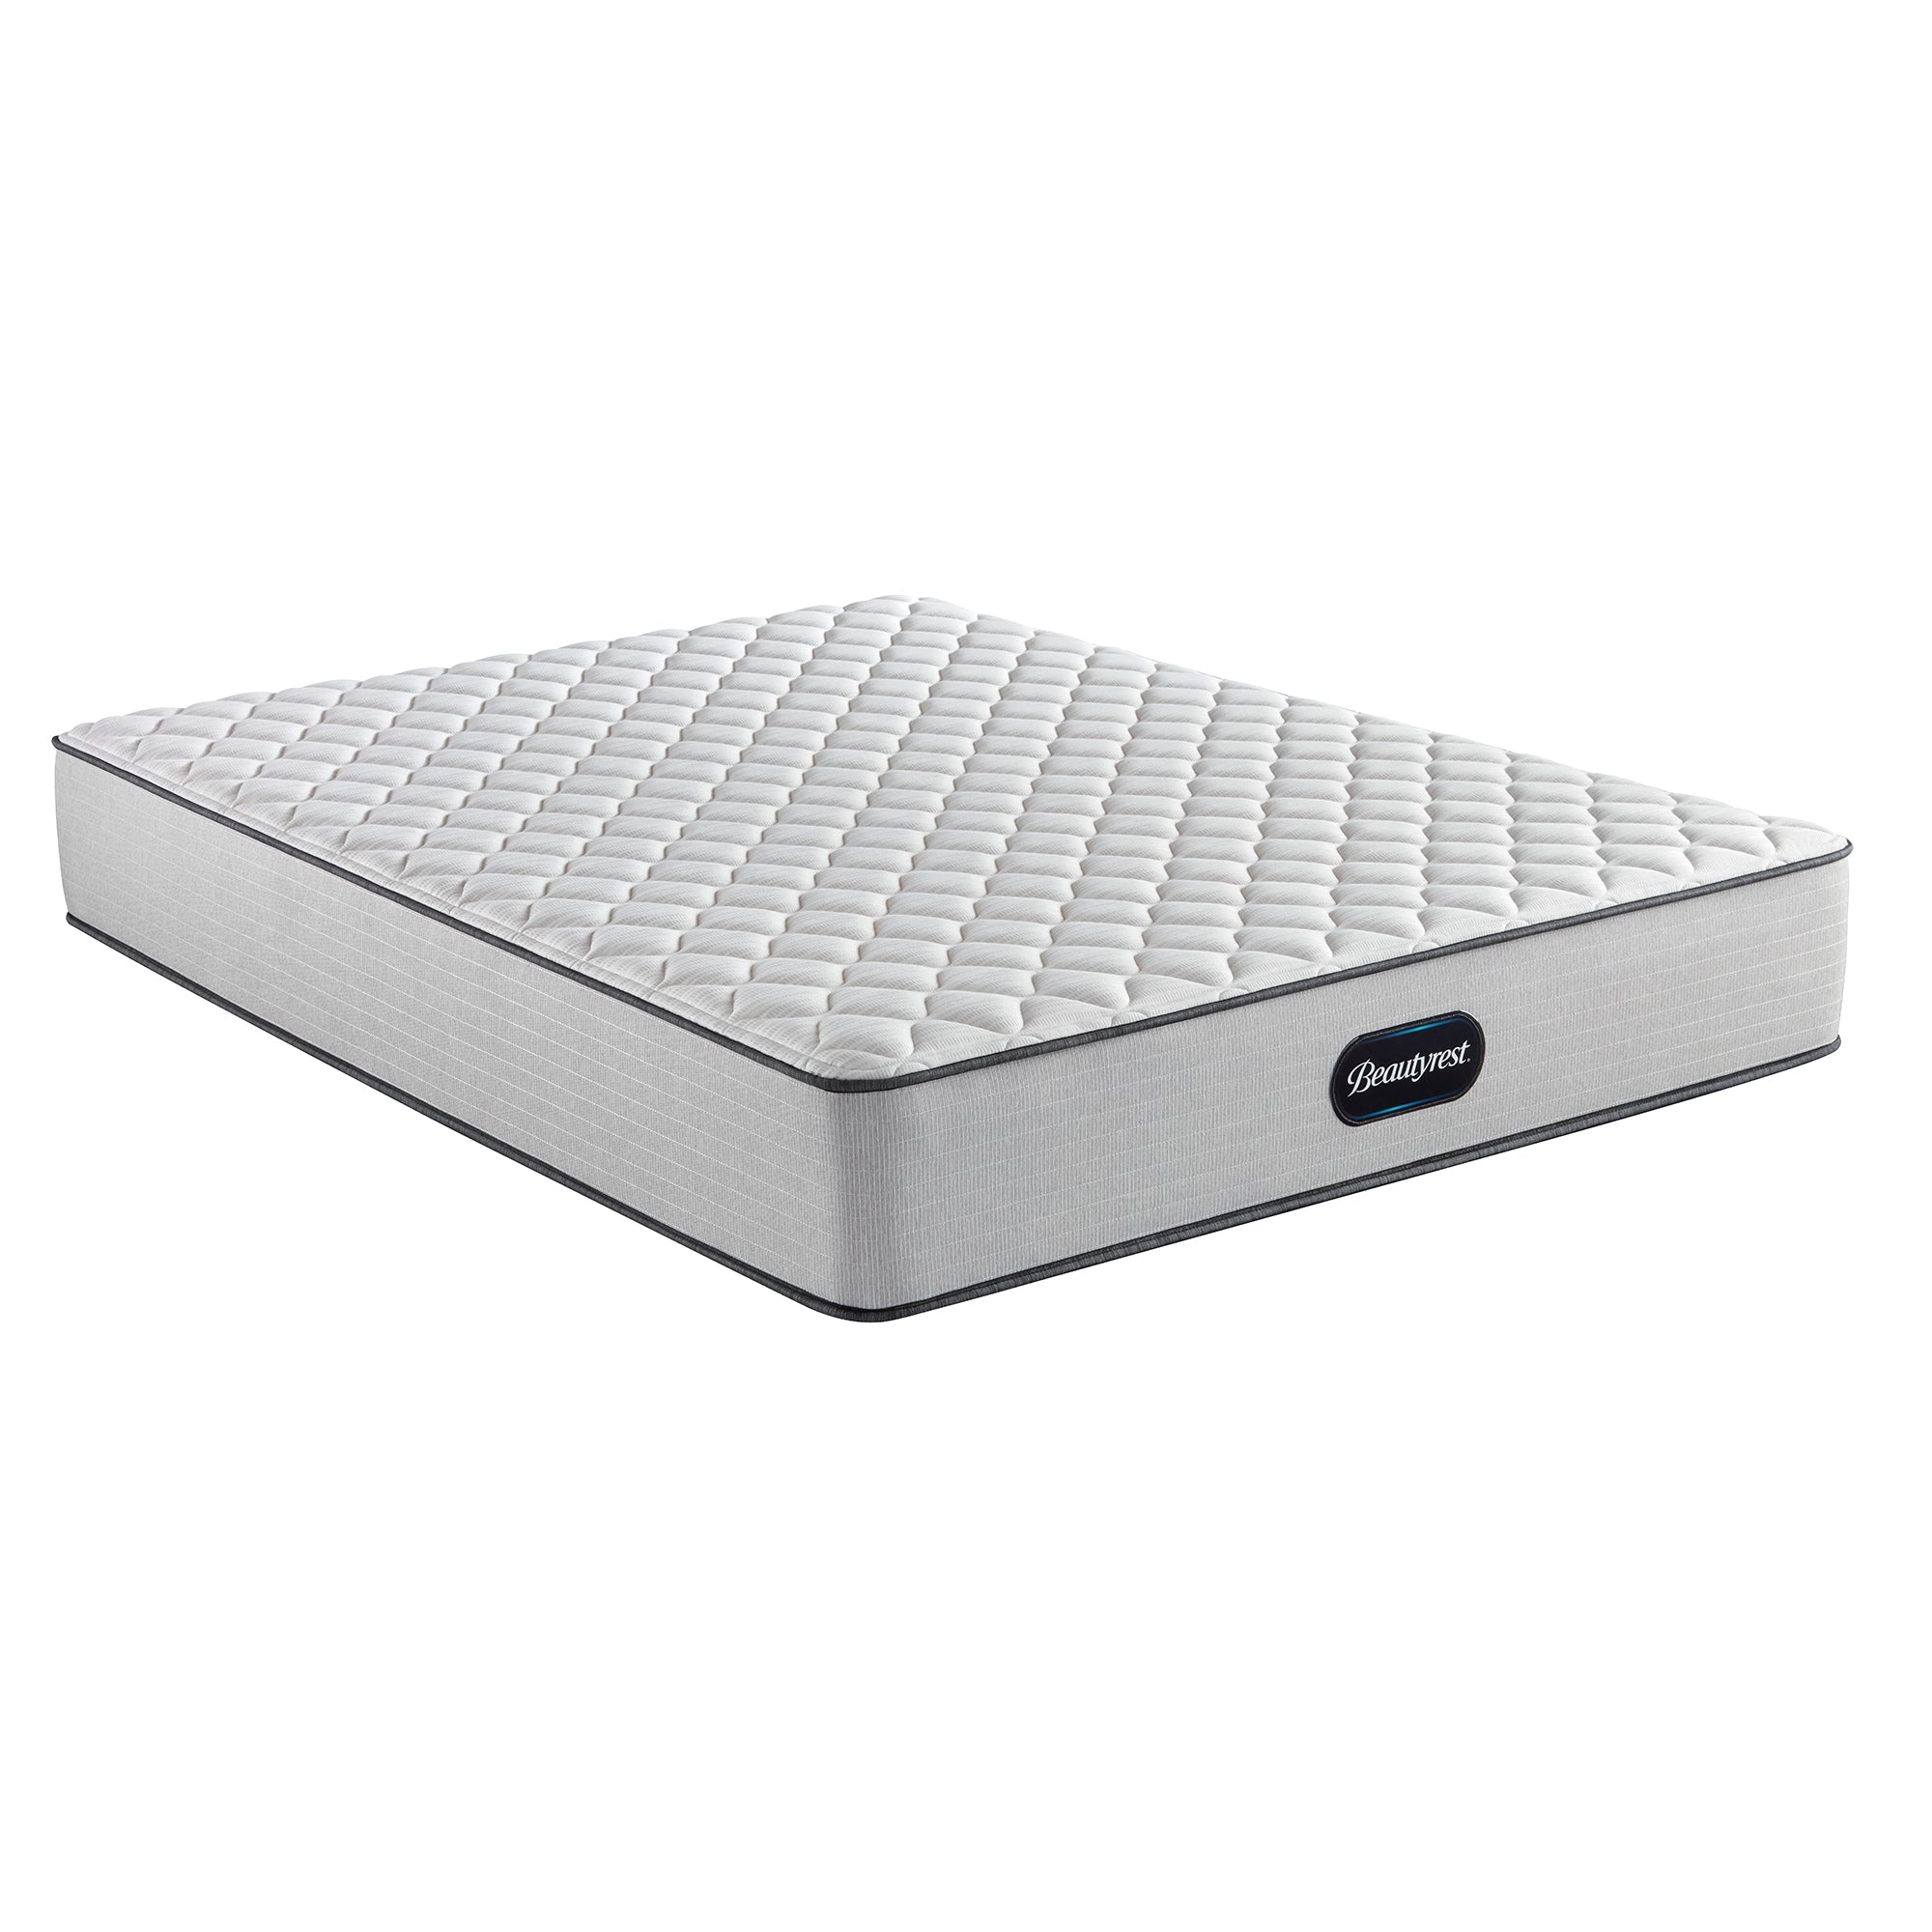 The Beautyrest BR800 Firm mattress alone on a white background